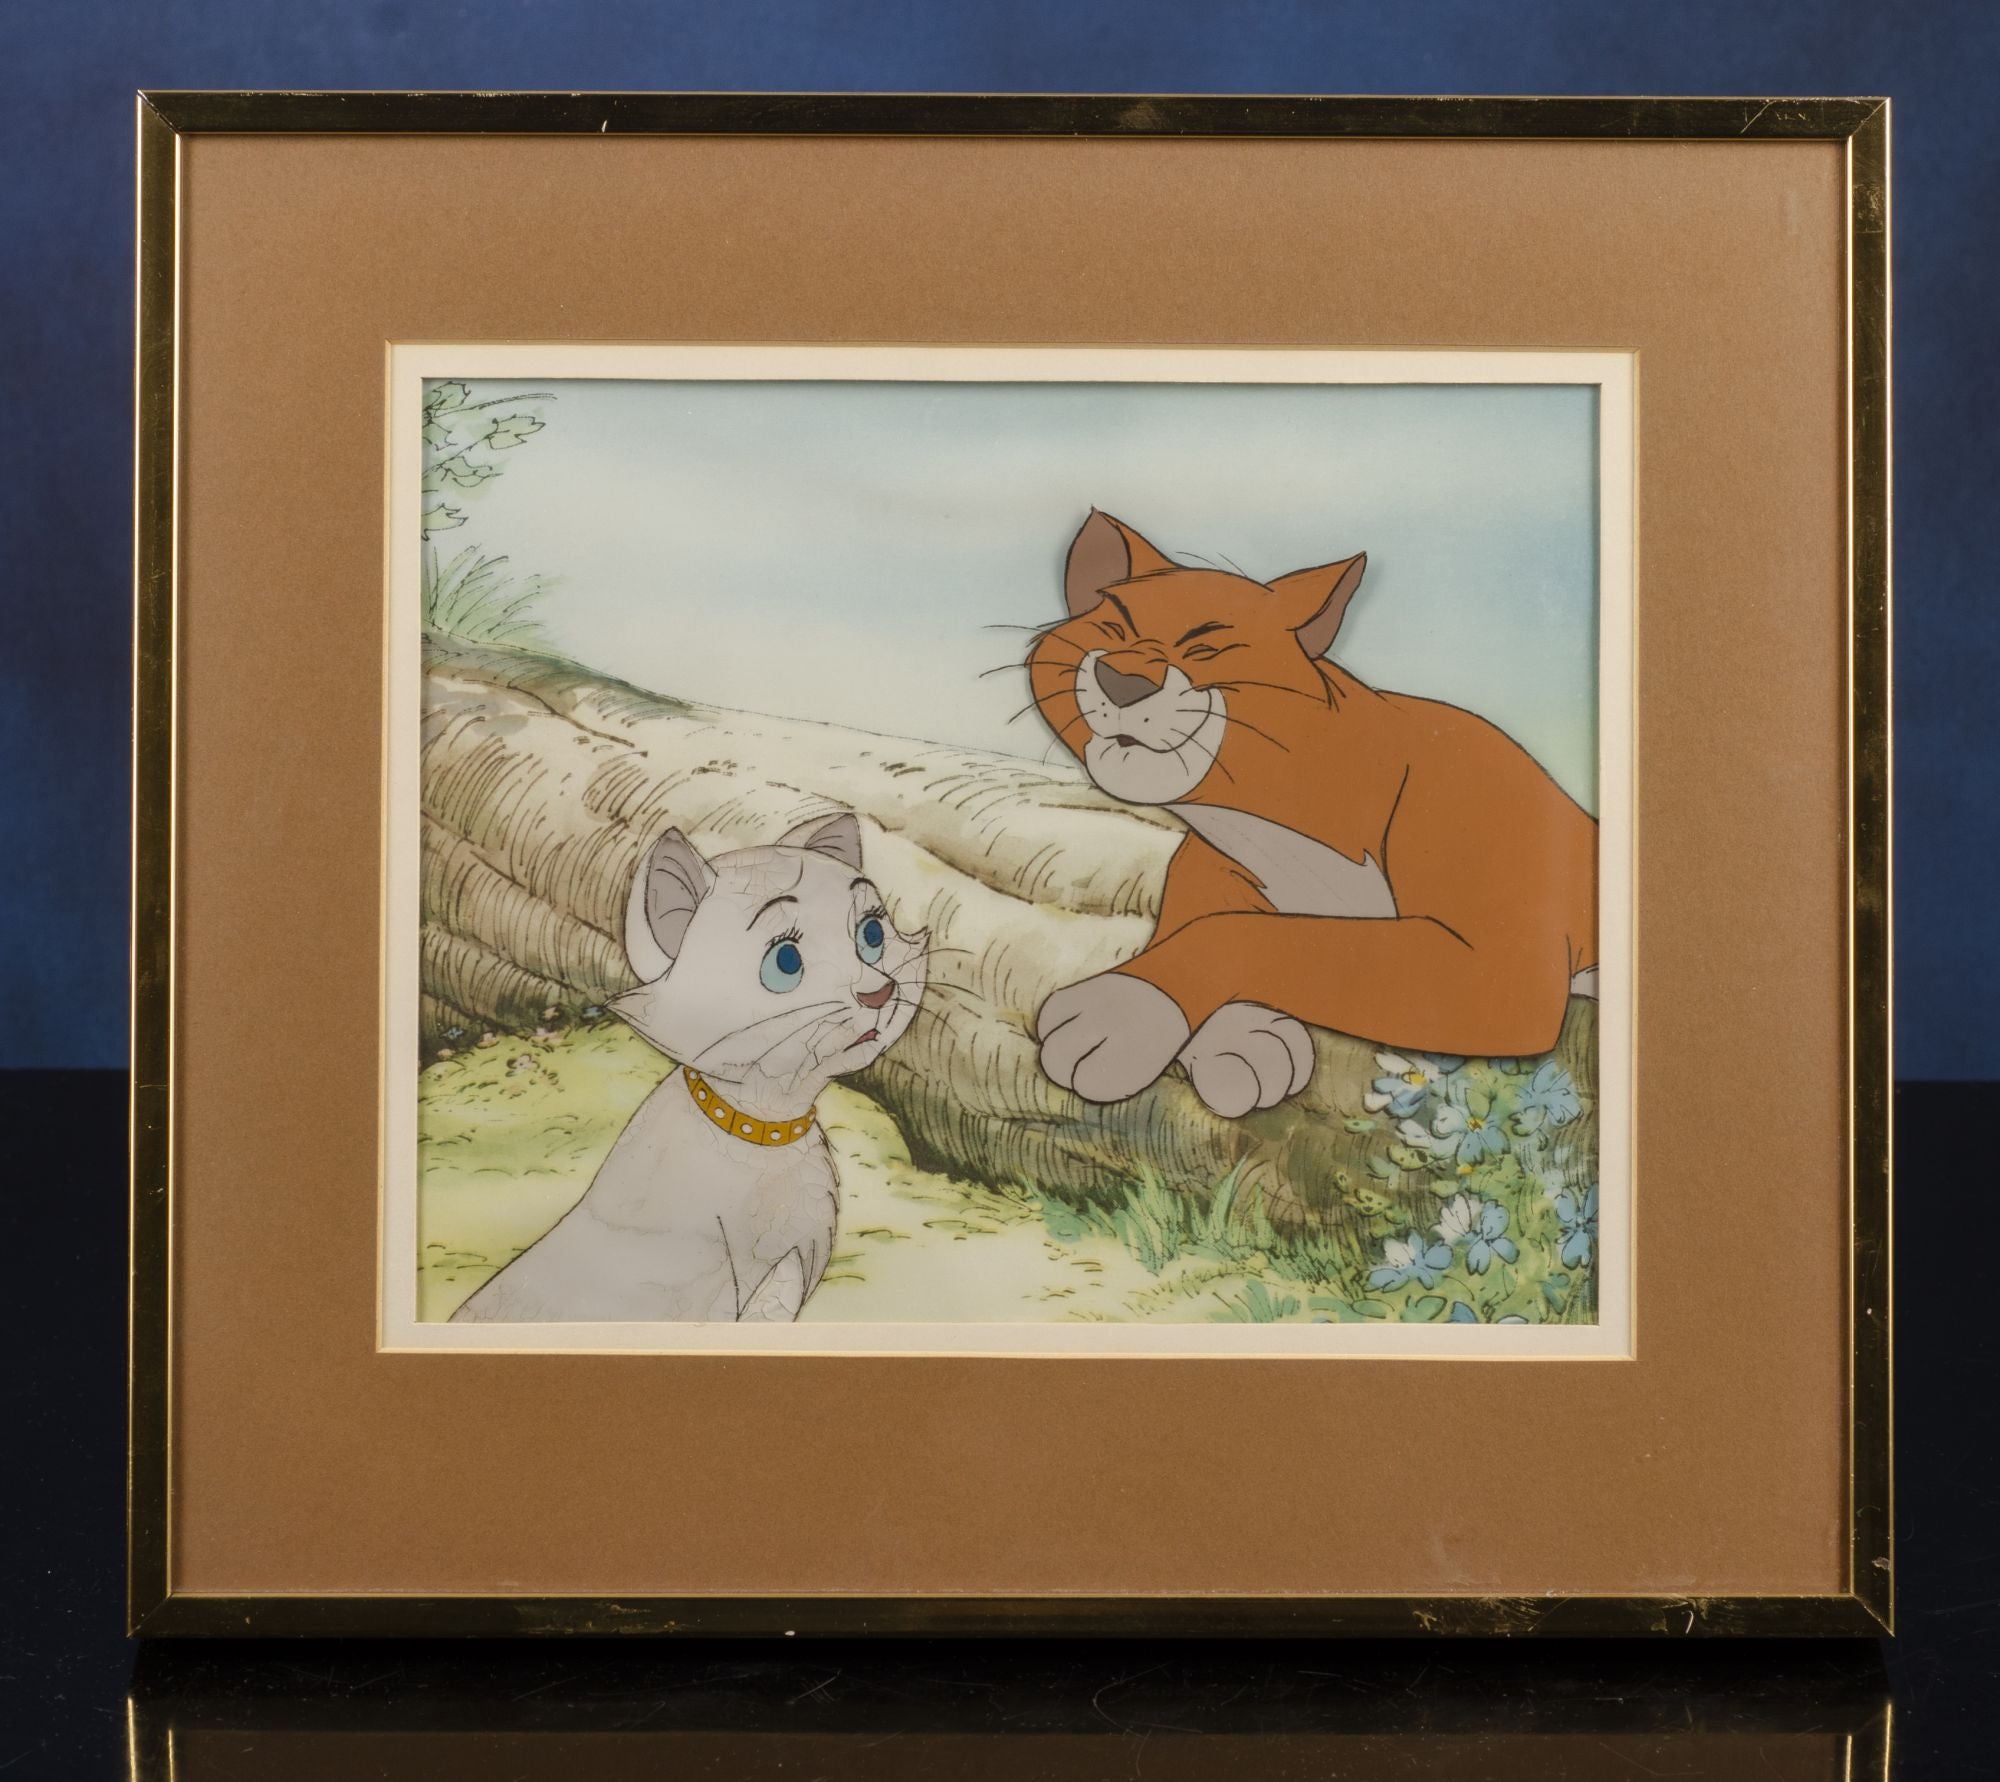 WALT DISNEY STUDIOS - Original Walt Disney Production Celluloid with Background Featuring Thomas O'Malley and Duchess from the Aristocats